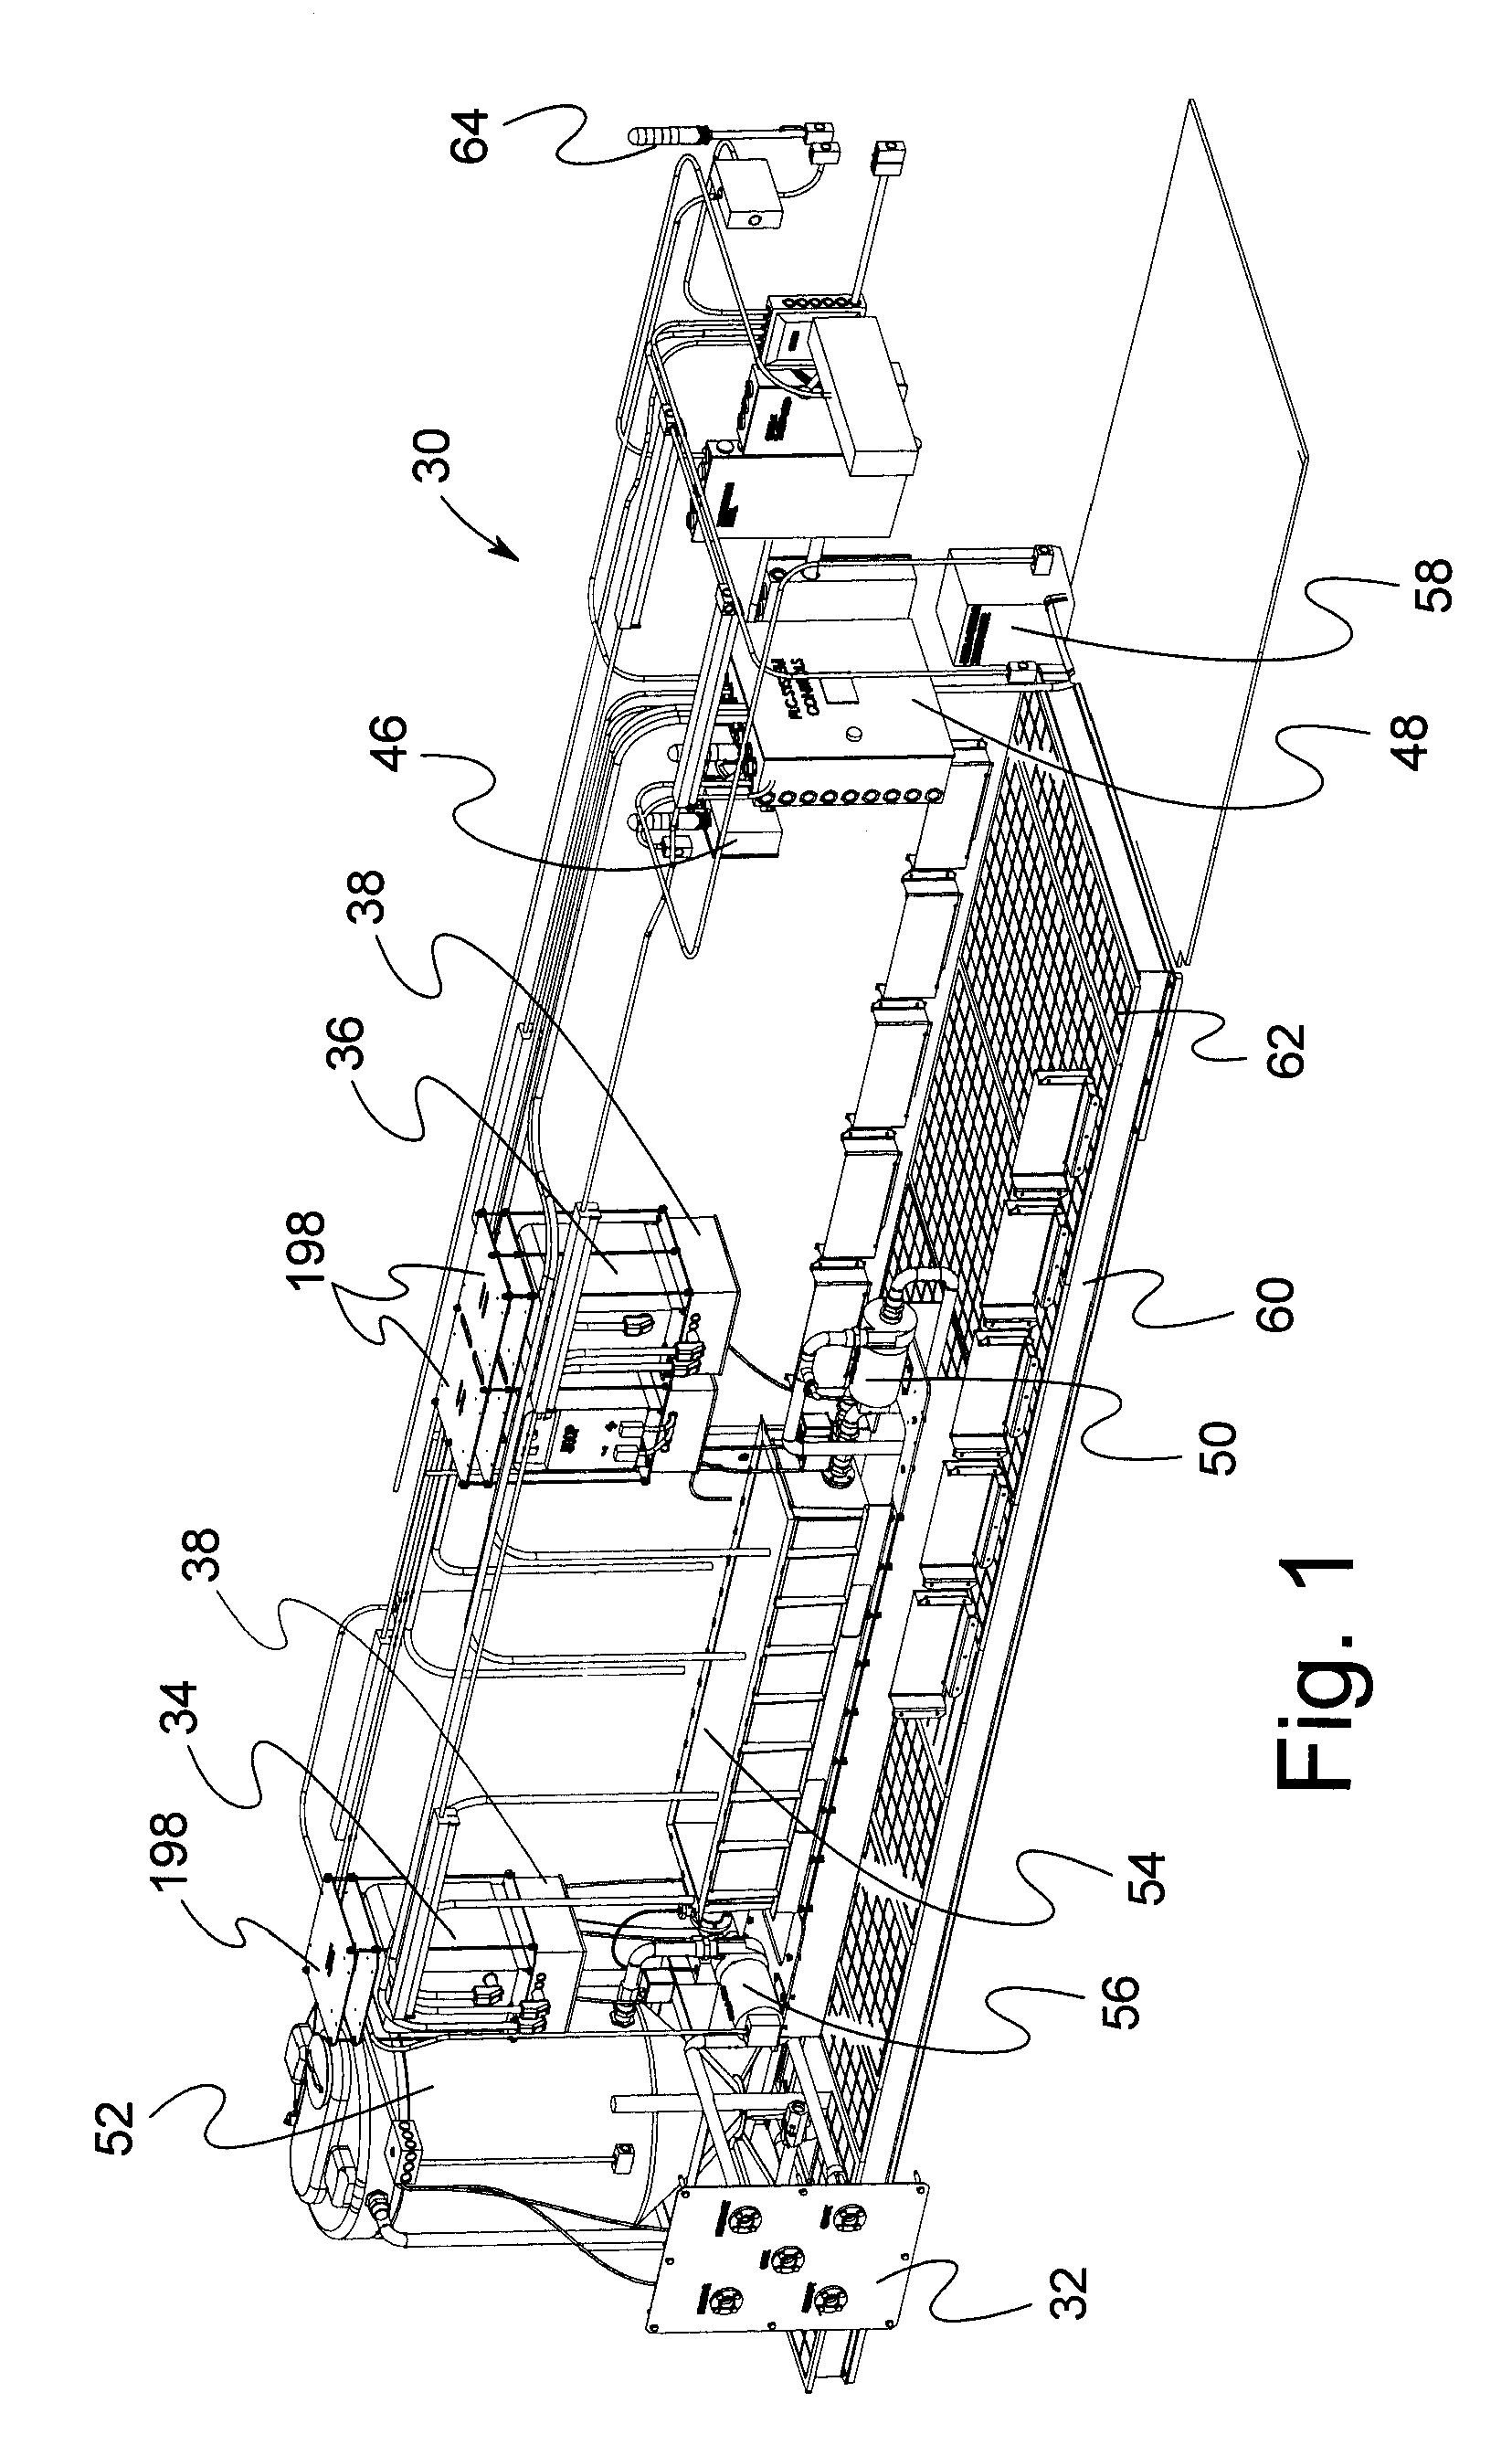 Method and apparatus for producing high volumes of clean water by electro coagulation